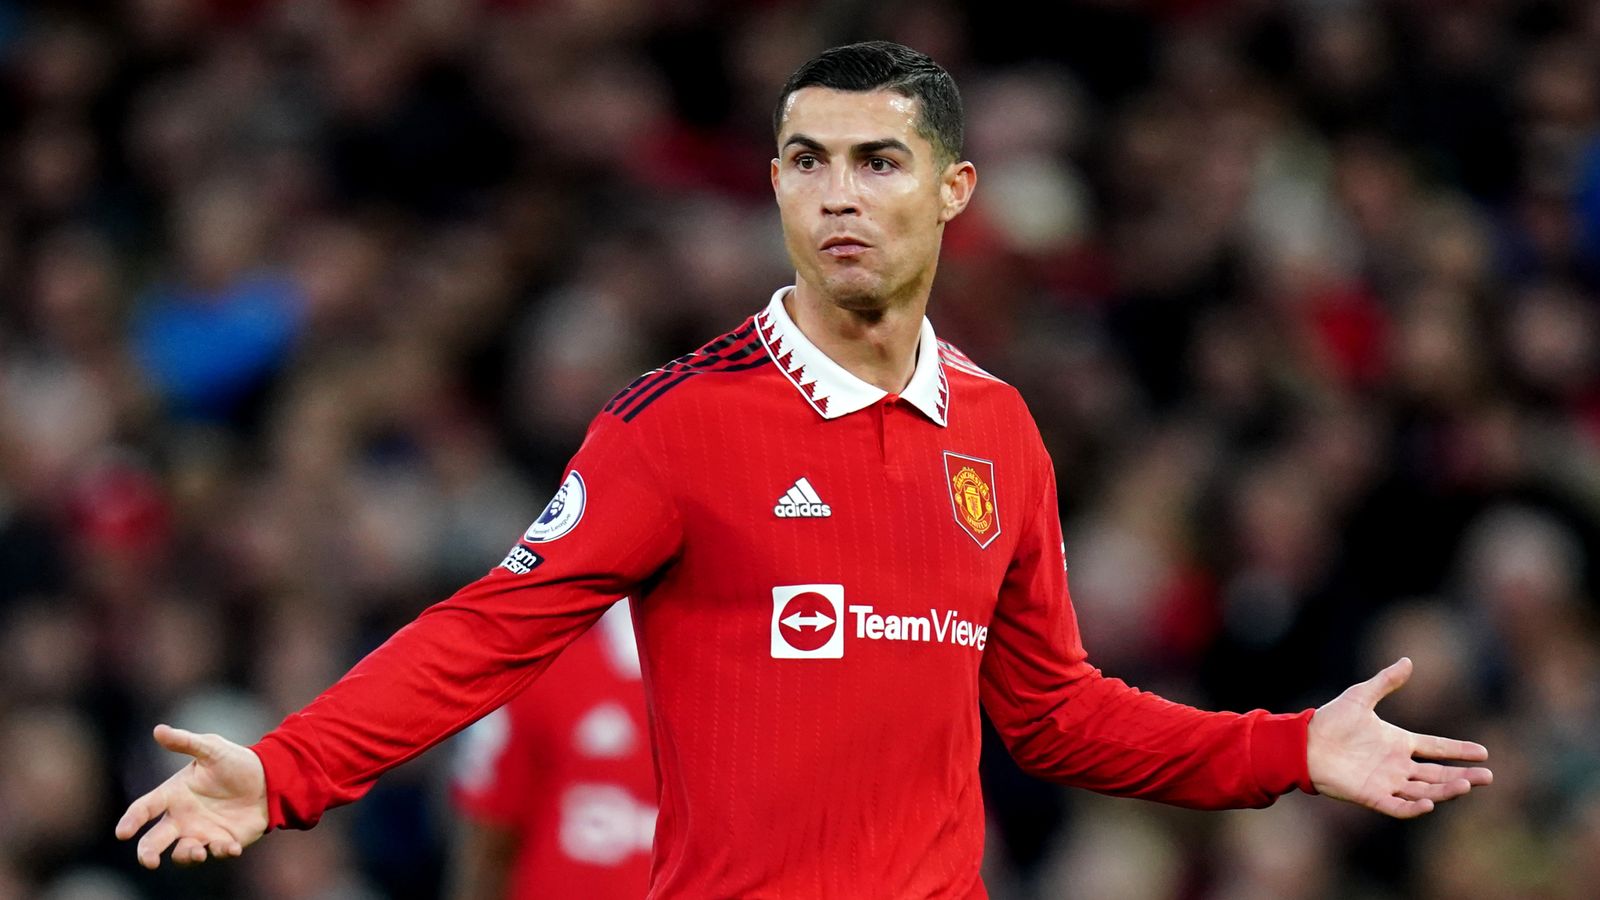 Cristiano Ronaldo leaves Manchester United with immediate effect | UK News